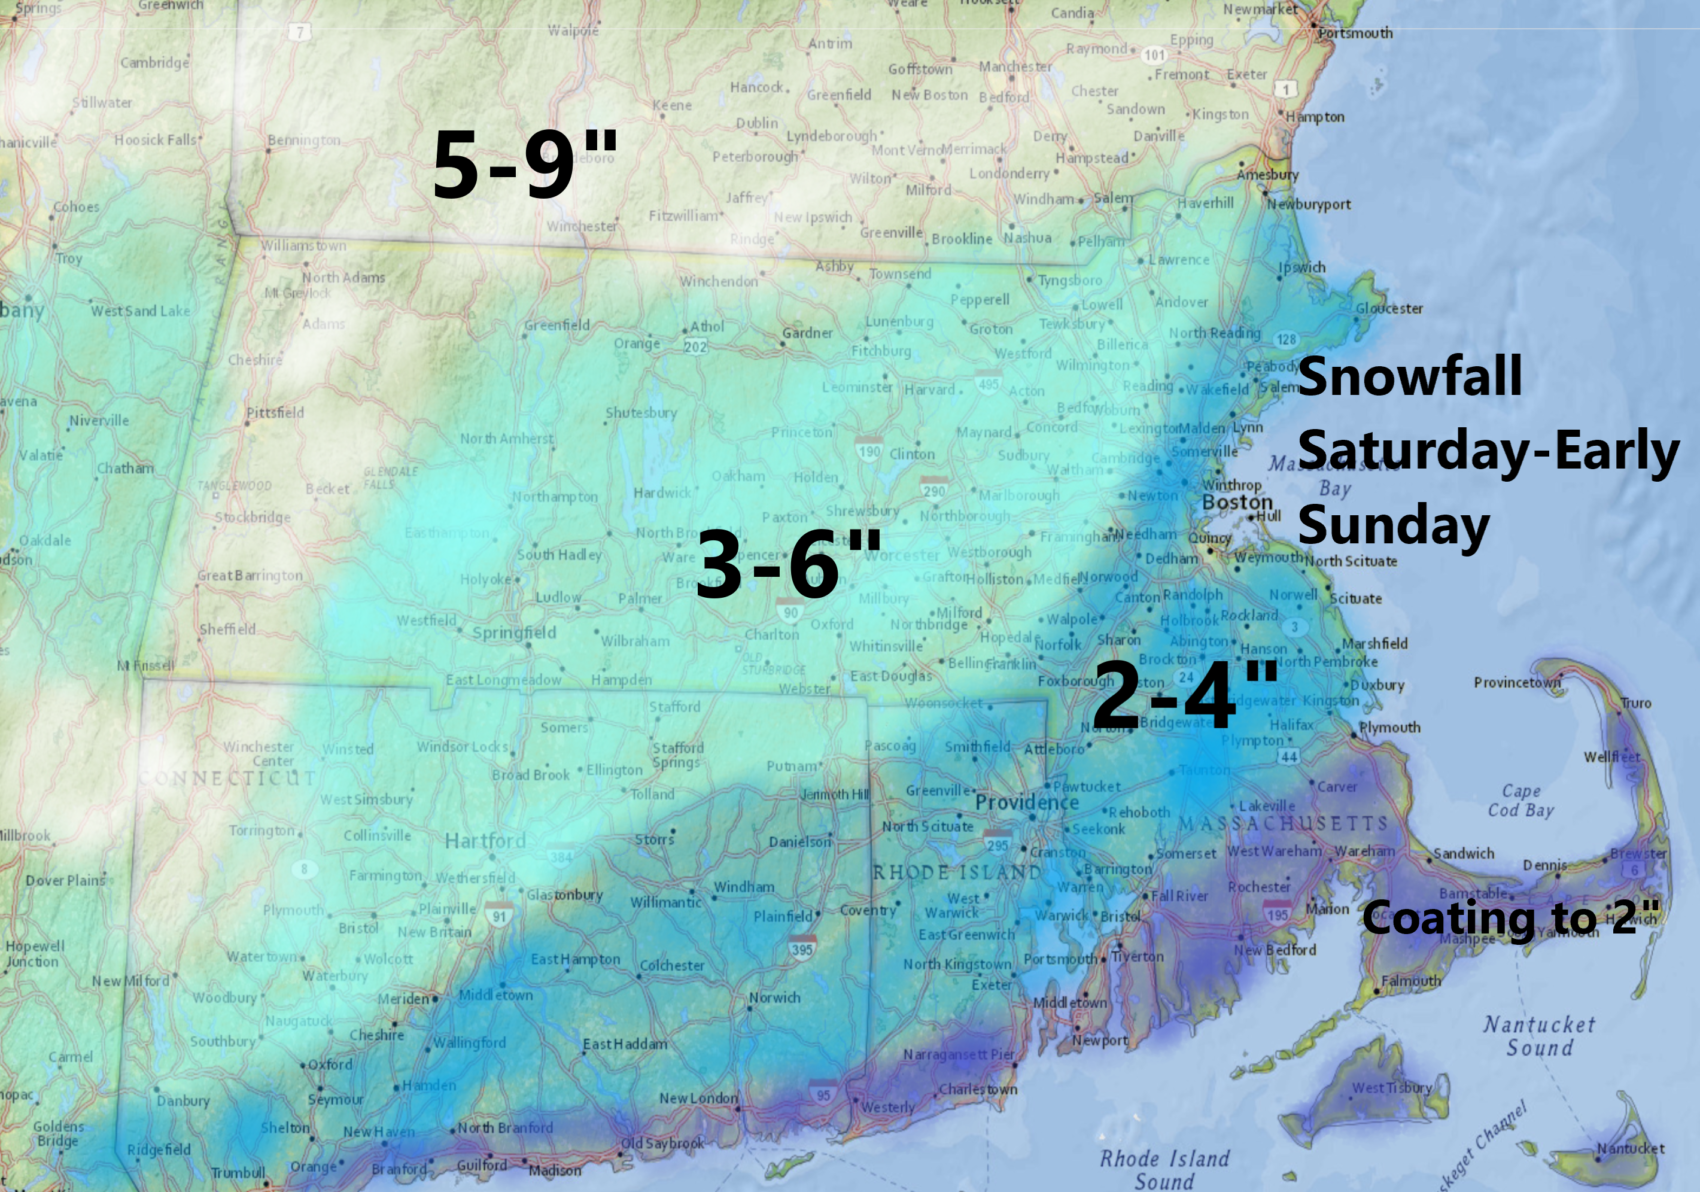 Snow falls heavy at times Saturday evening, but is over by Sunday morning. (Dave Epstein/WBUR)